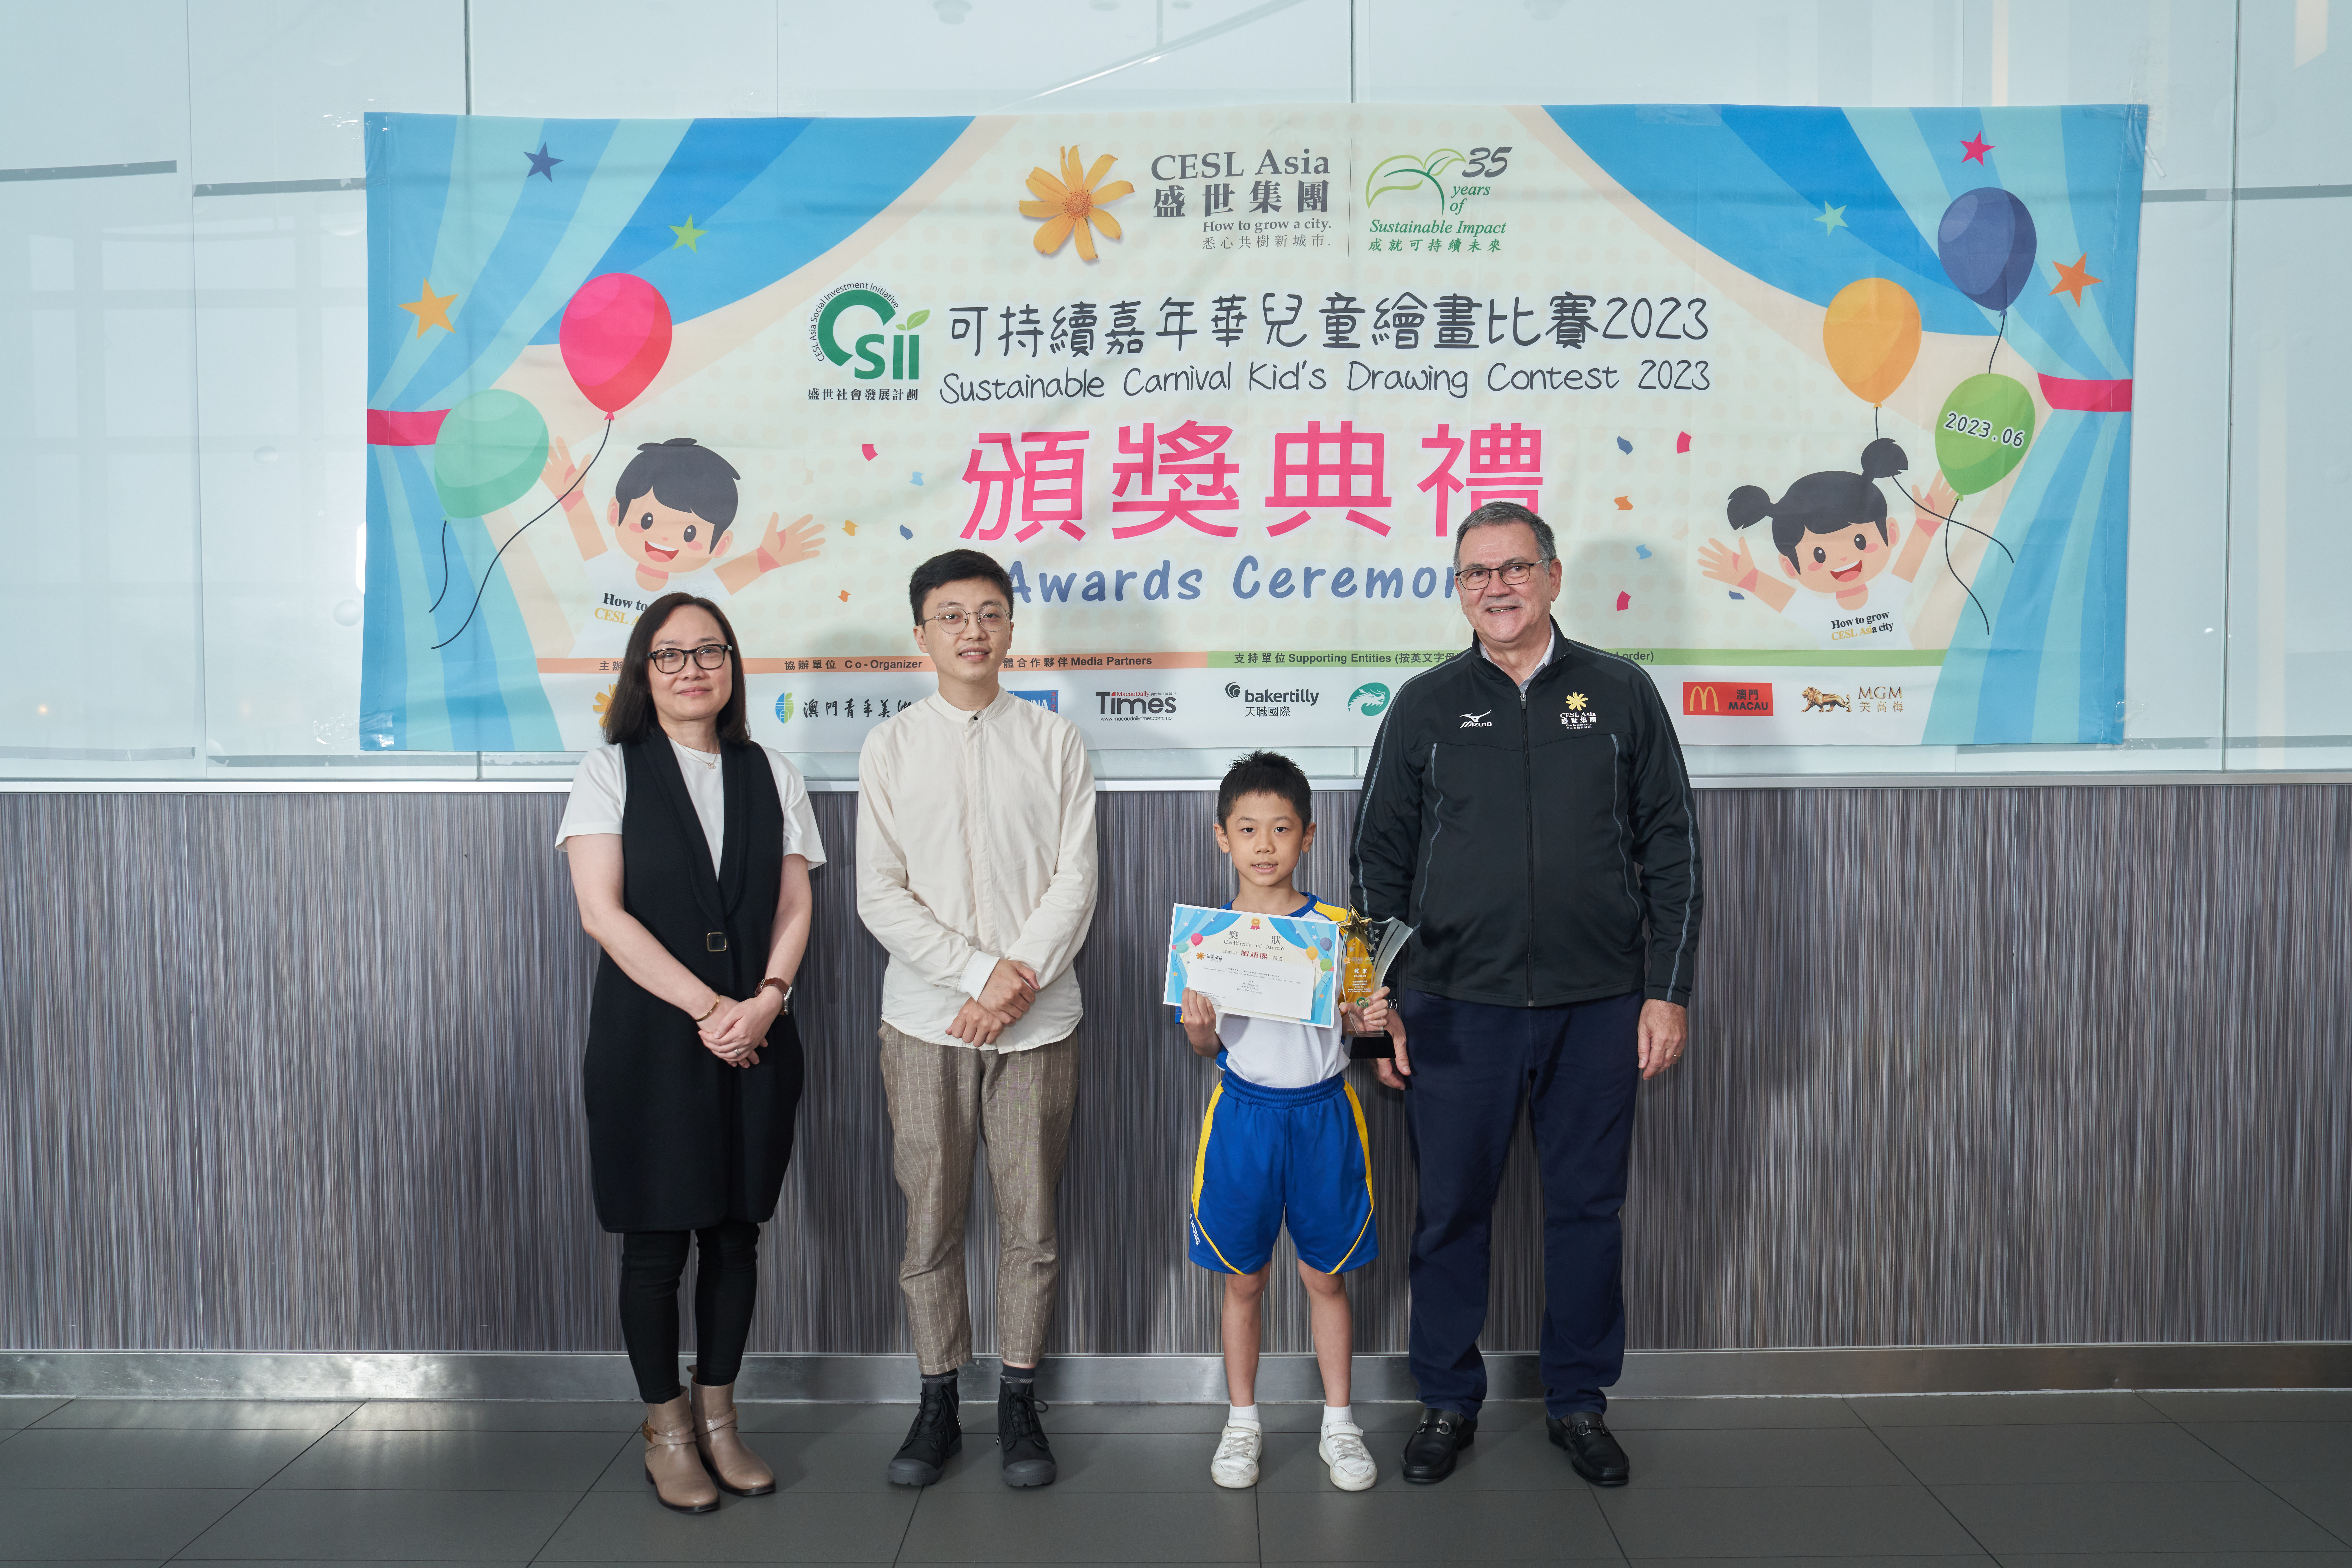 CESL Asia Social Investment Initiative Kid’s Drawing Contest 2023  Awards Ceremony